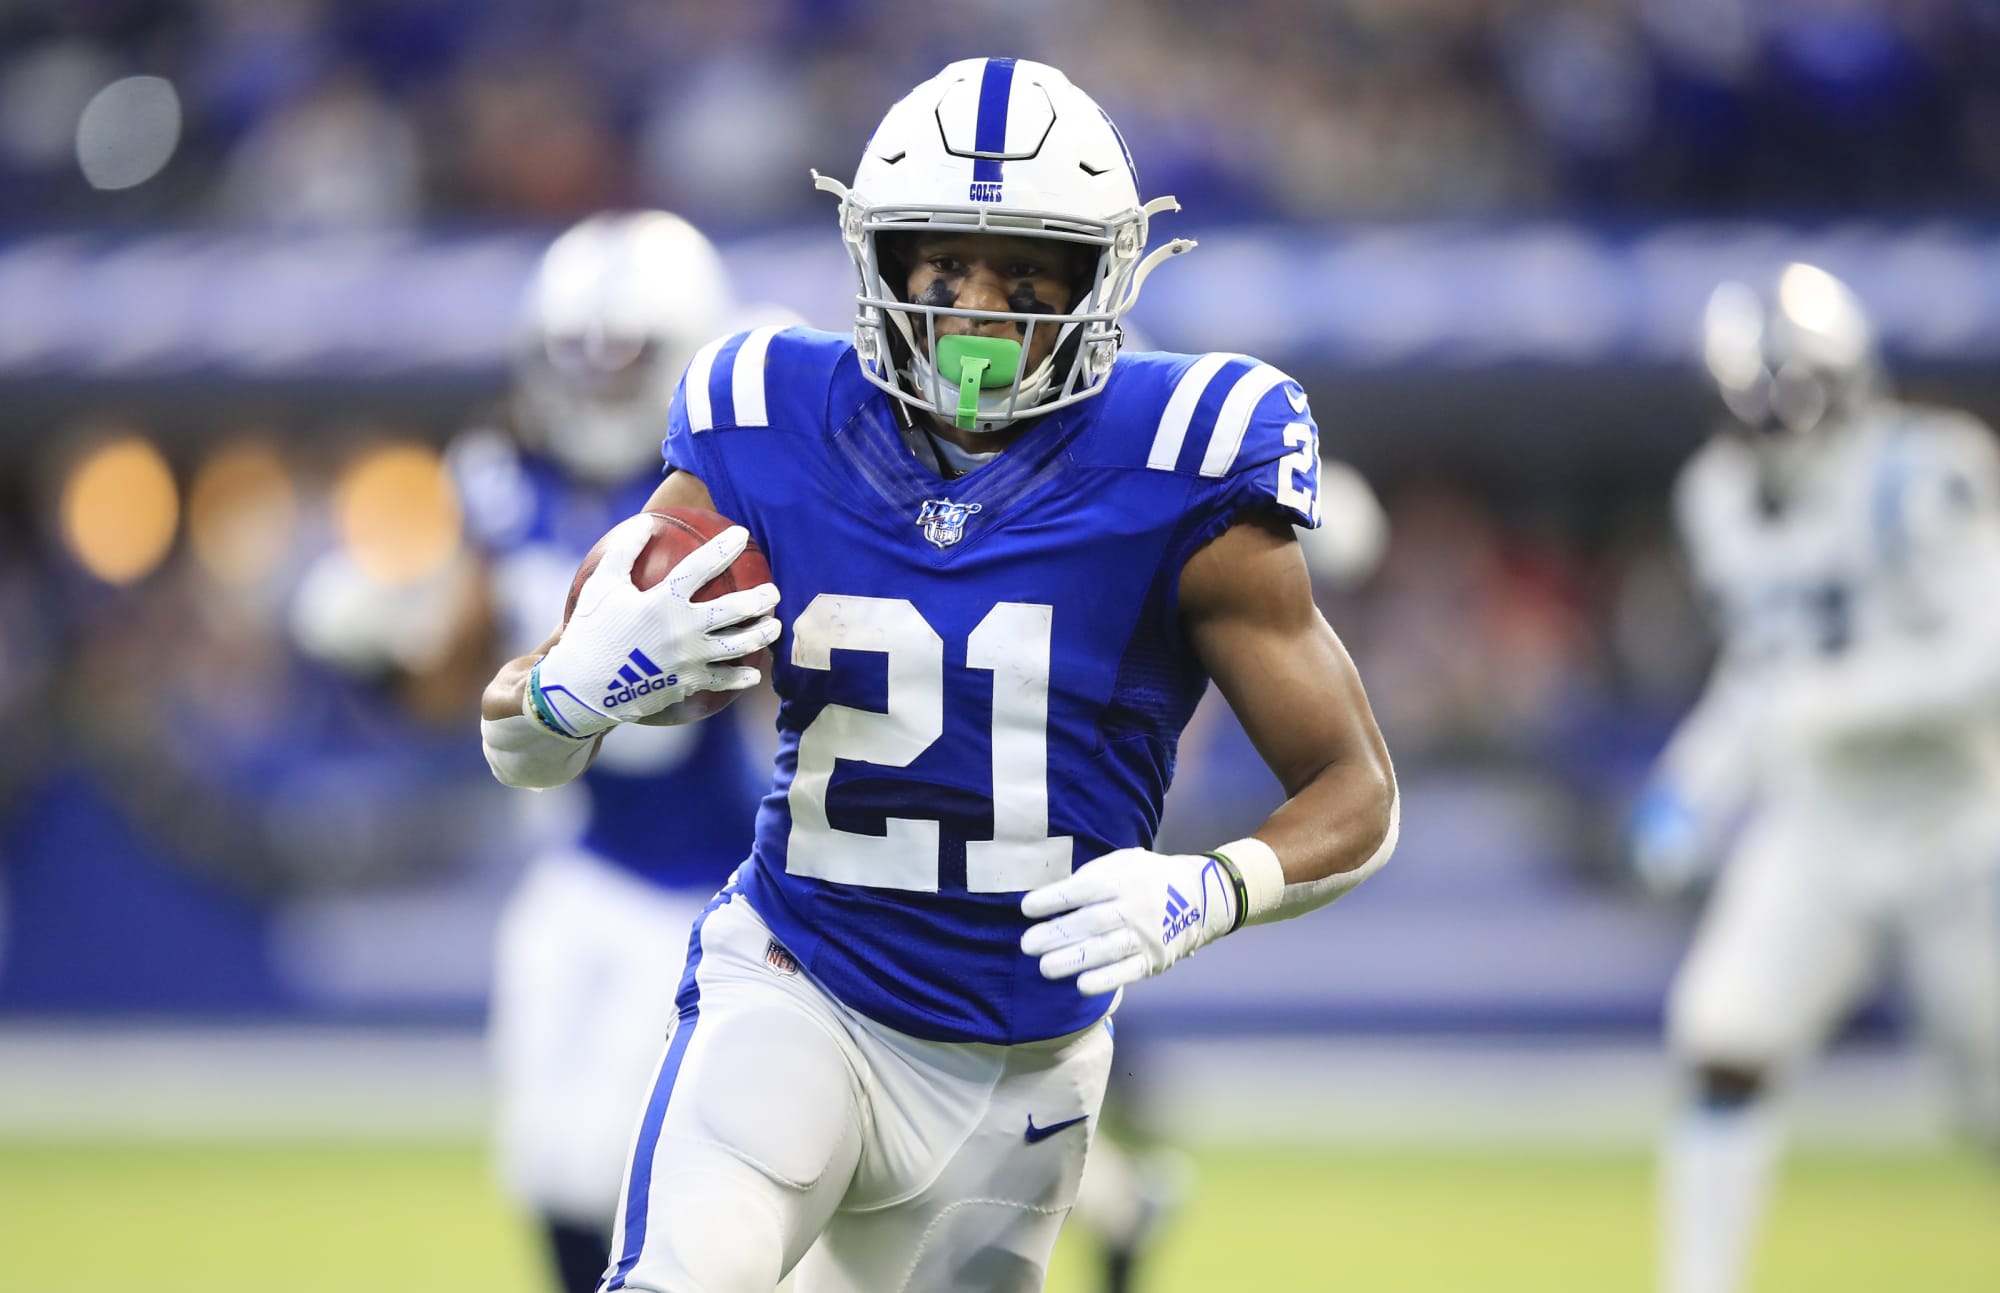 https%3A%2F%2Ffansided.com%2Fwp content%2Fuploads%2Fgetty images%2F2018%2F08%2F1195660031 - Fantasy Football: Week 1 Waiver Wire Pickups and Targets